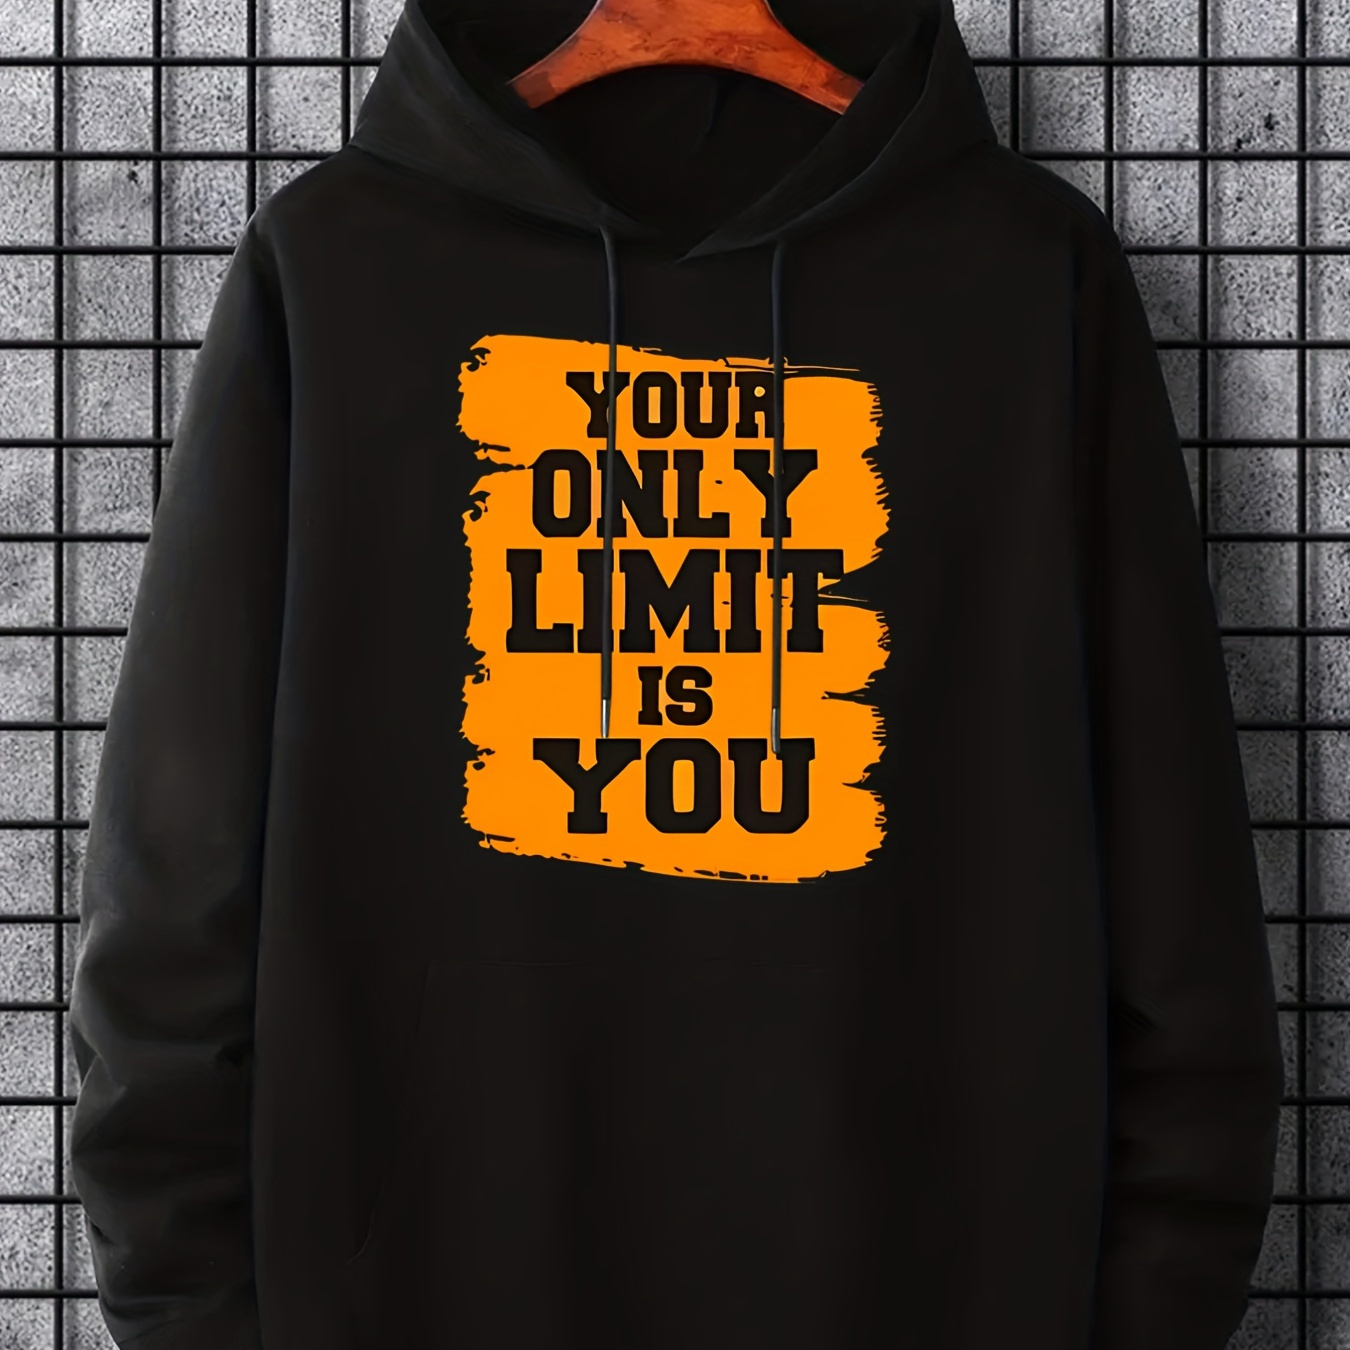 

Slogan ' Your Only Limit Is You ' Print Hoodie, Hoodies For Men, Men’s Casual Graphic Design Pullover Hooded Sweatshirt With Kangaroo Pocket For Spring Fall, As Gifts